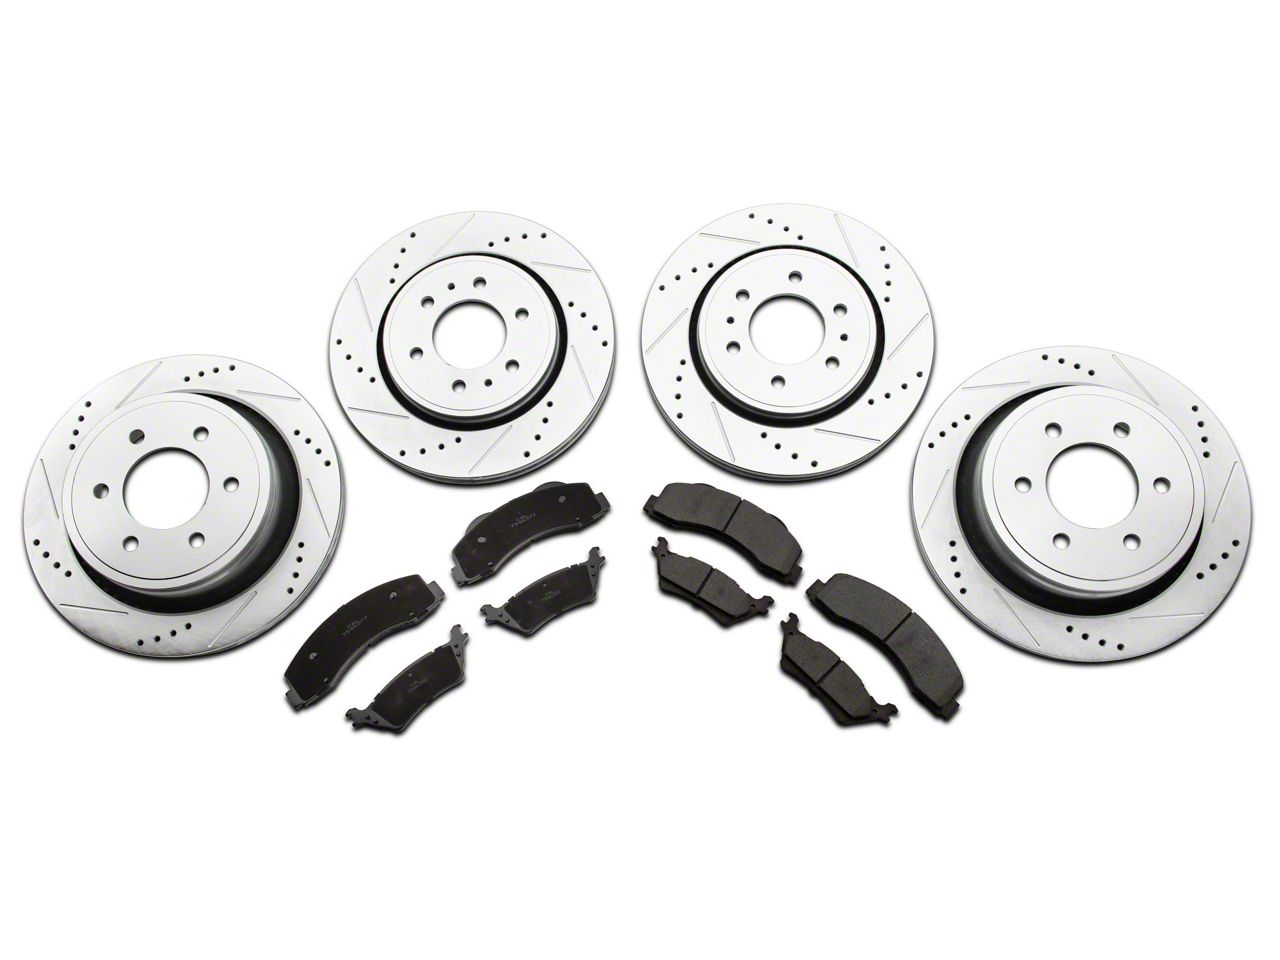 Details about   SP Front Rotors for 1985 F-150 Rear Wheel DriveDrilled Slotted F54-564463 